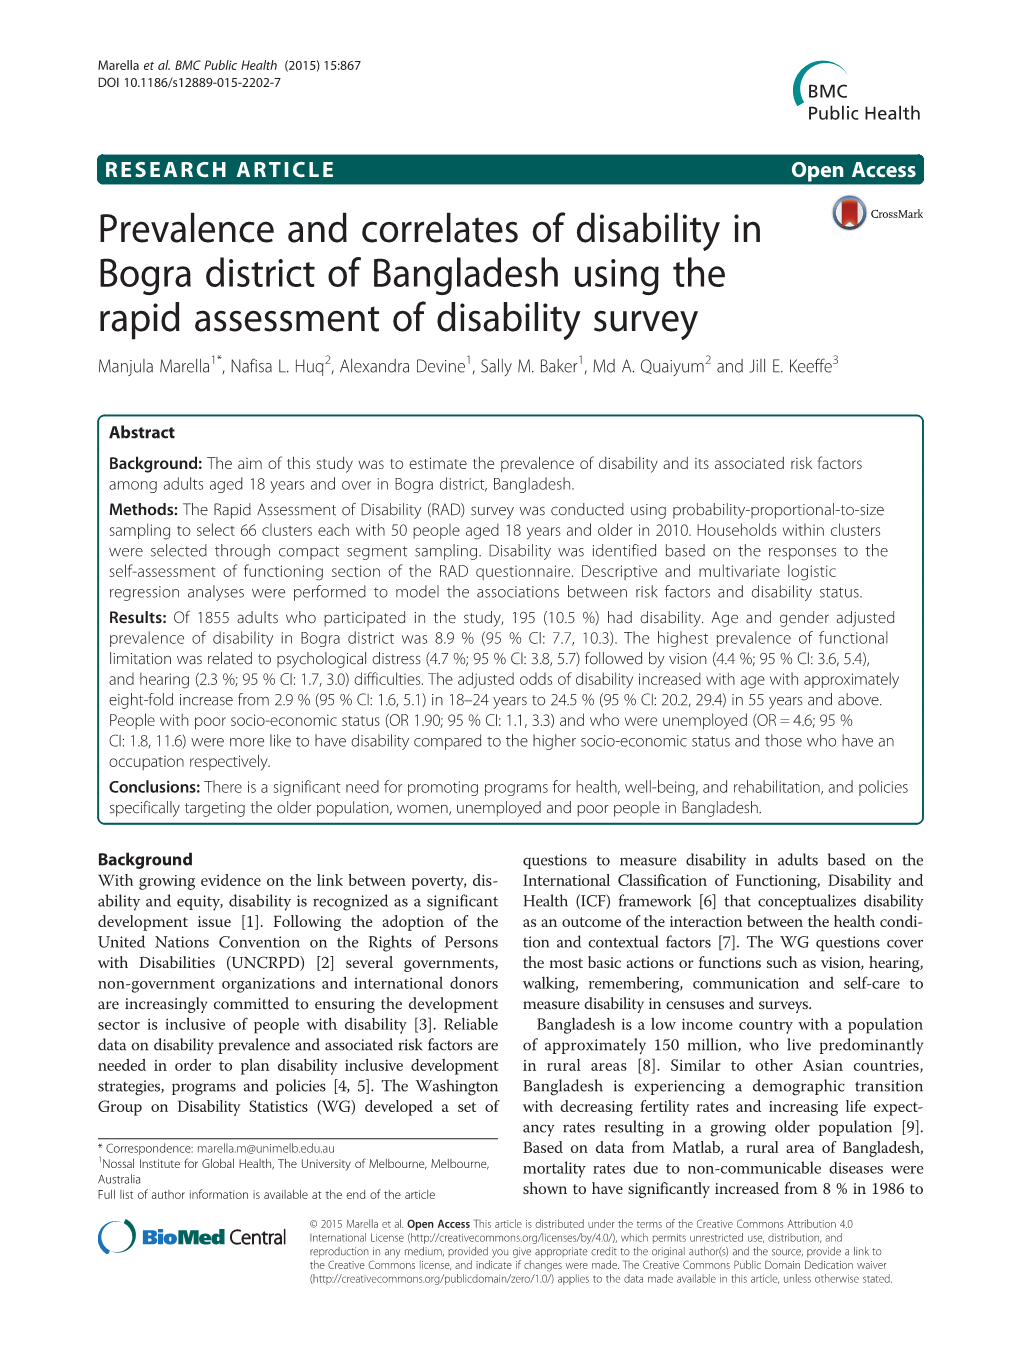 Prevalence and Correlates of Disability in Bogra District of Bangladesh Using the Rapid Assessment of Disability Survey Manjula Marella1*, Nafisa L